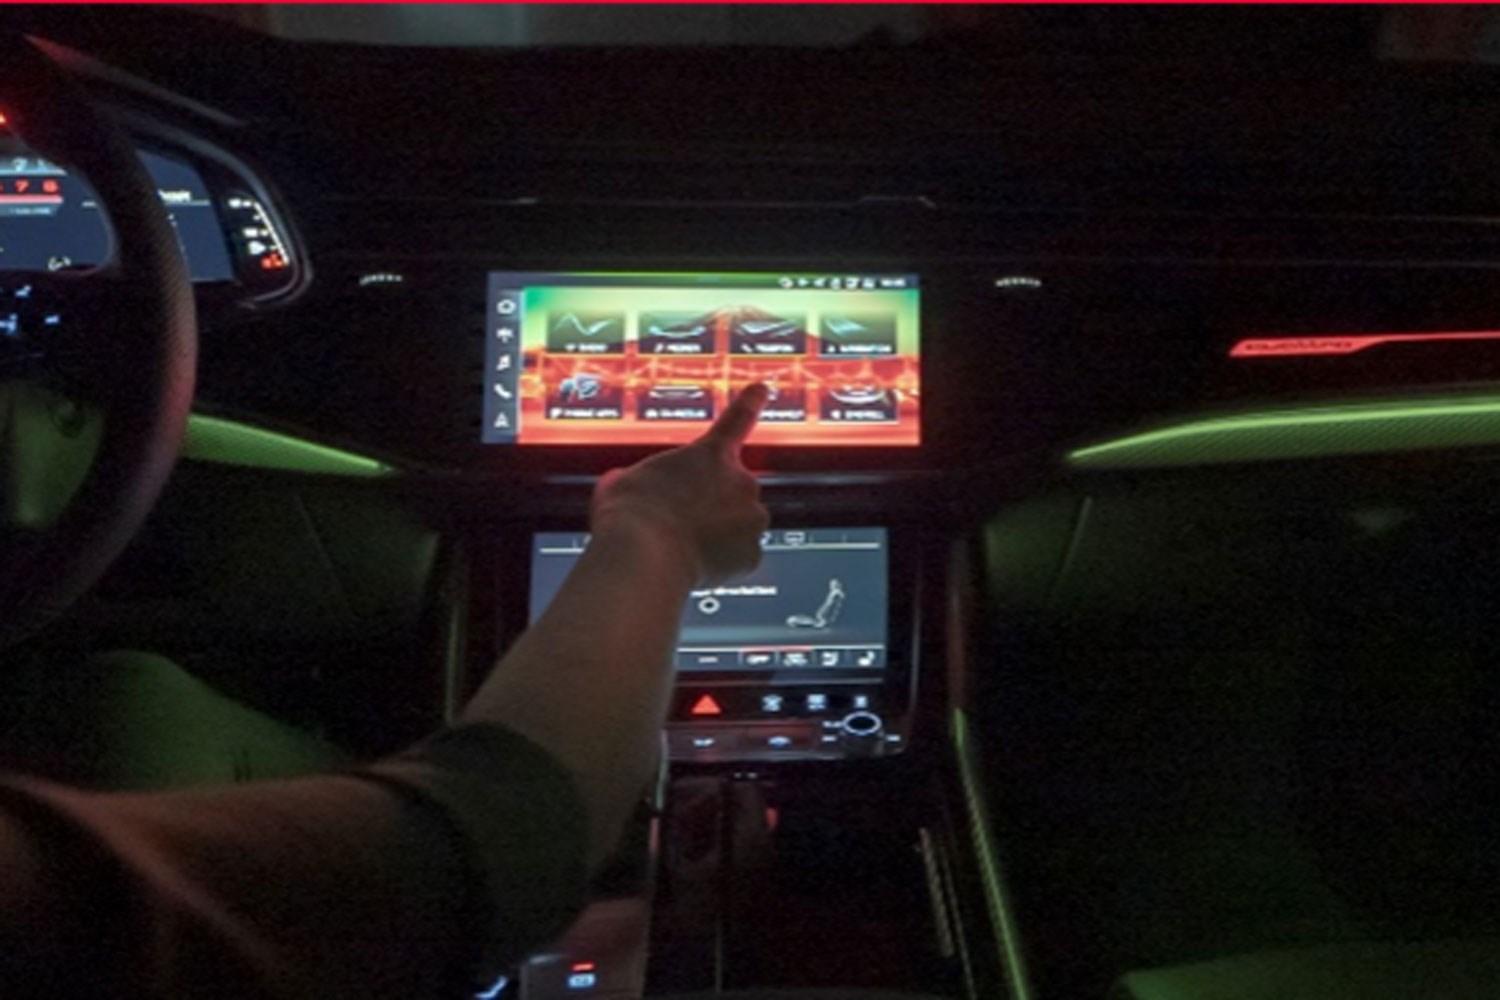 Image of Audi driver using the touch screen infotainment system